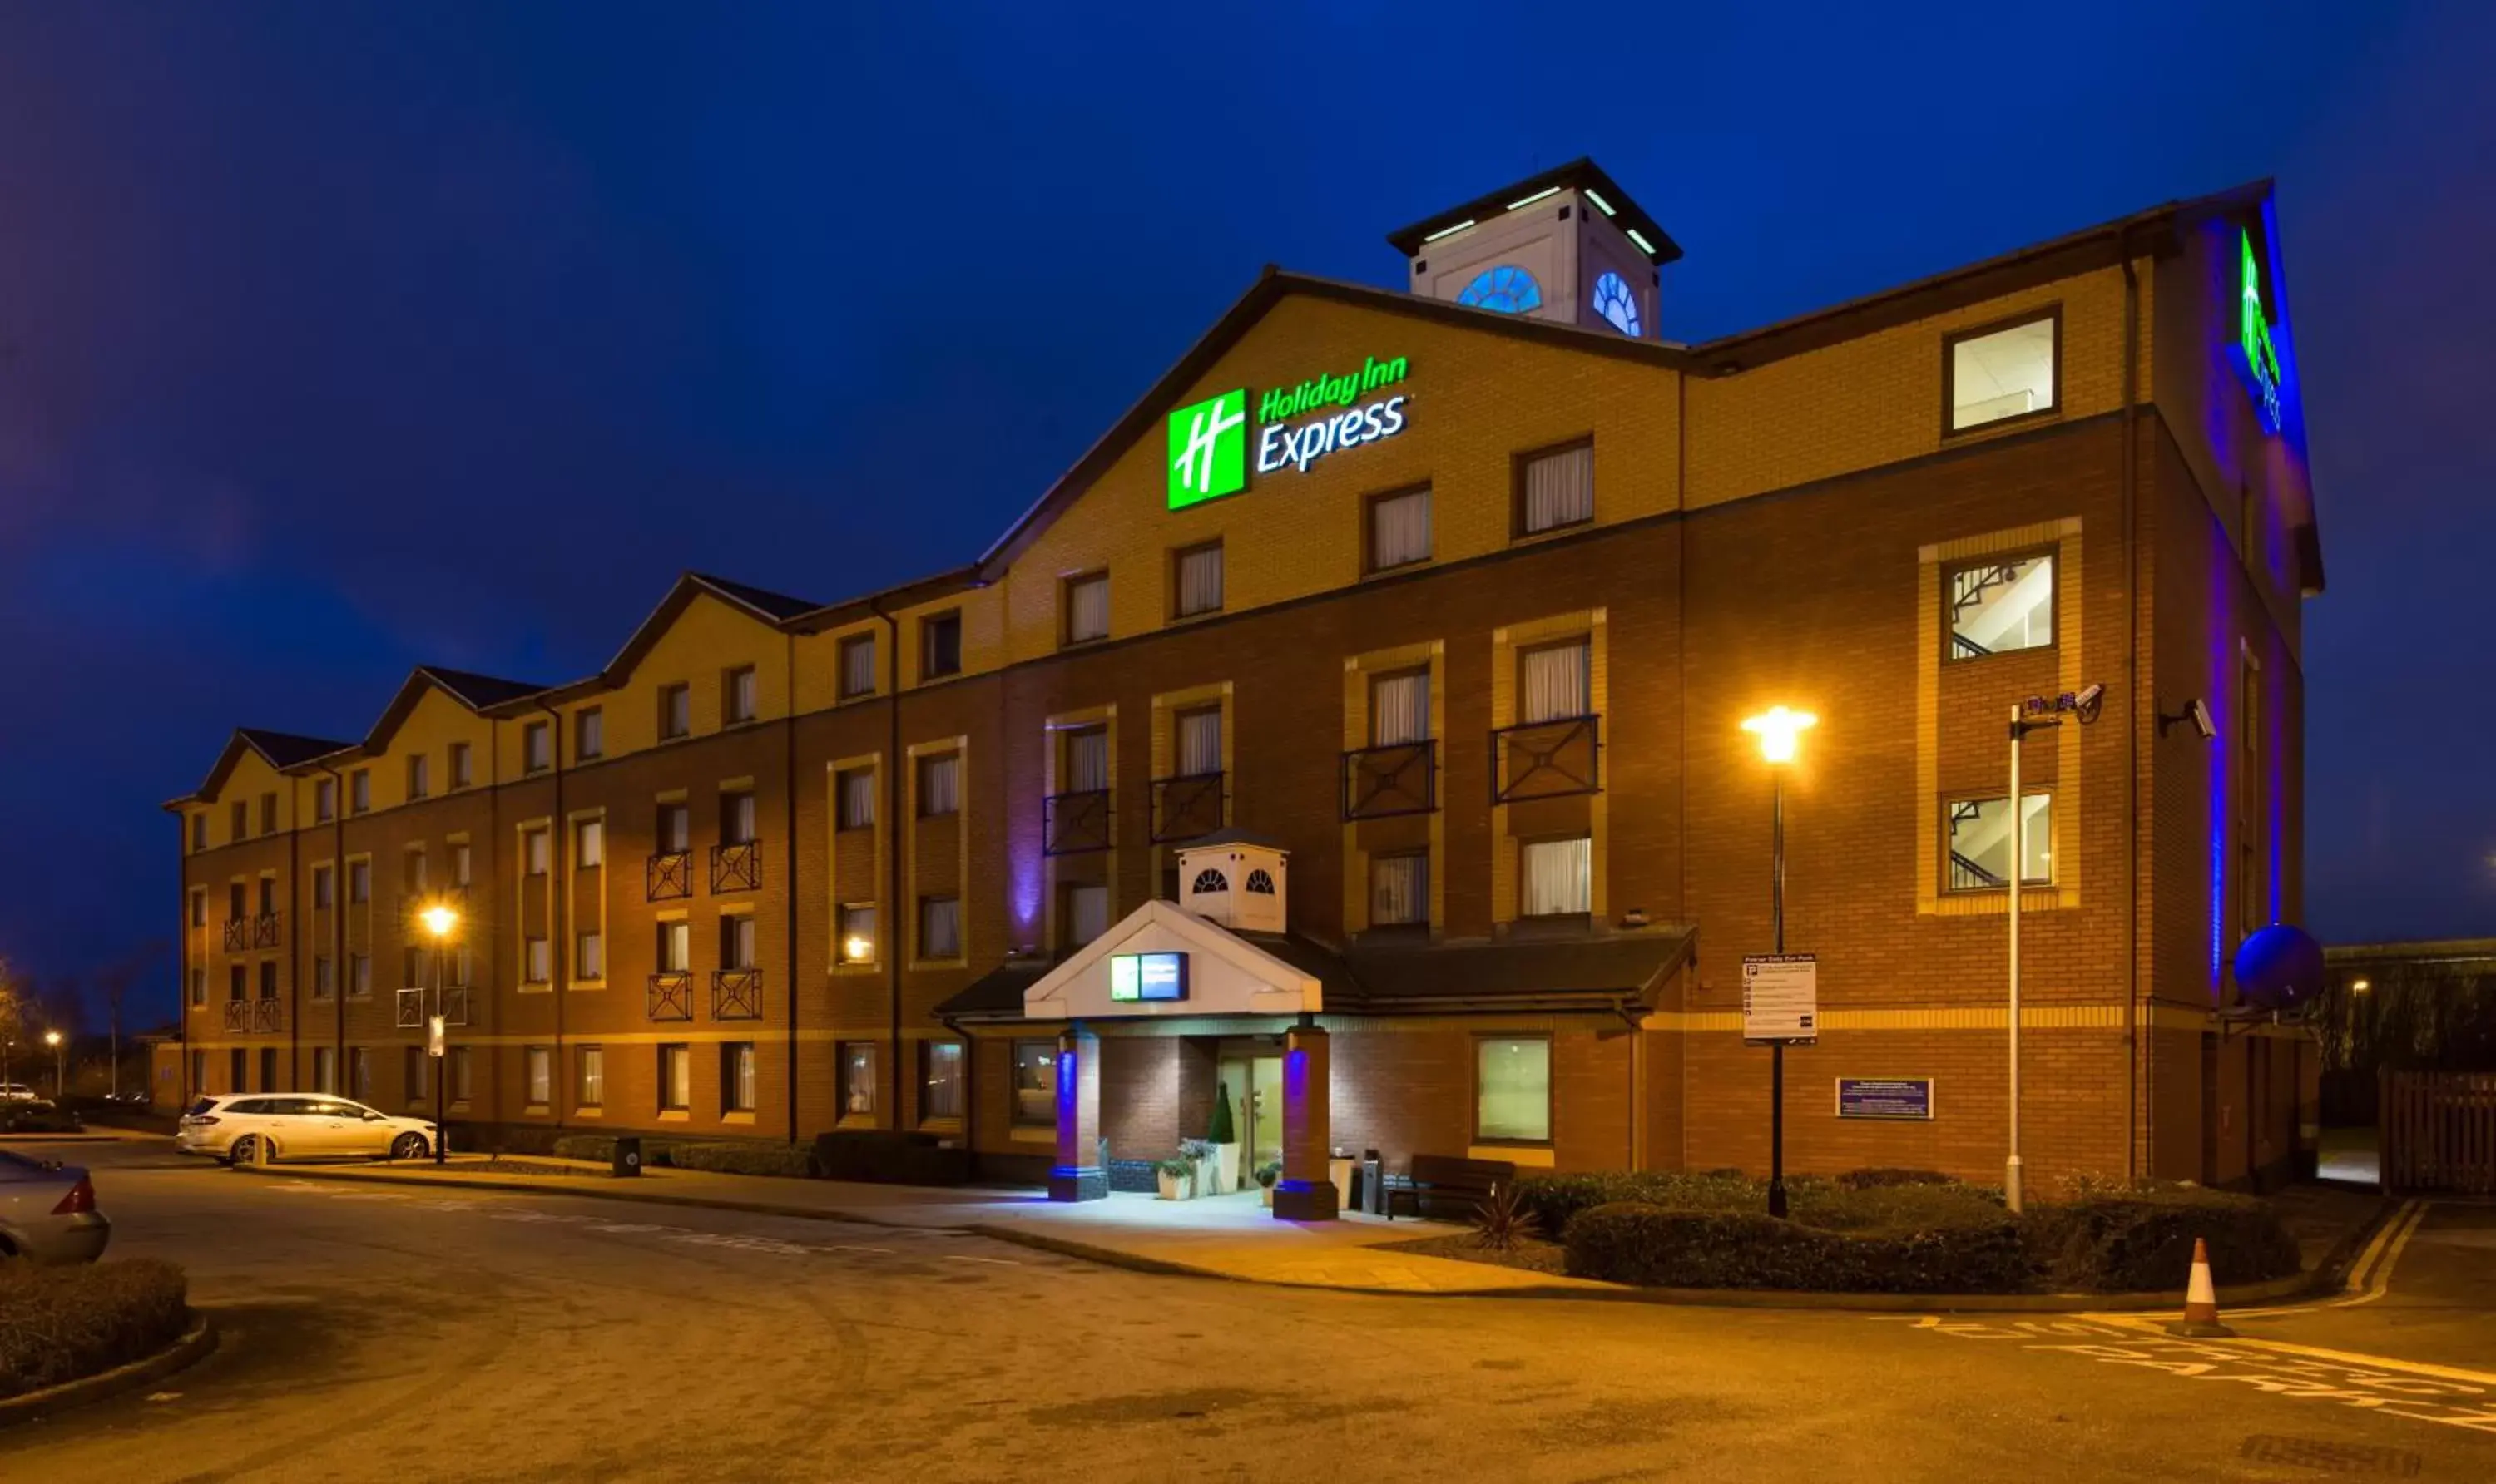 Property Building in Holiday Inn Express Stoke-On-Trent, an IHG Hotel